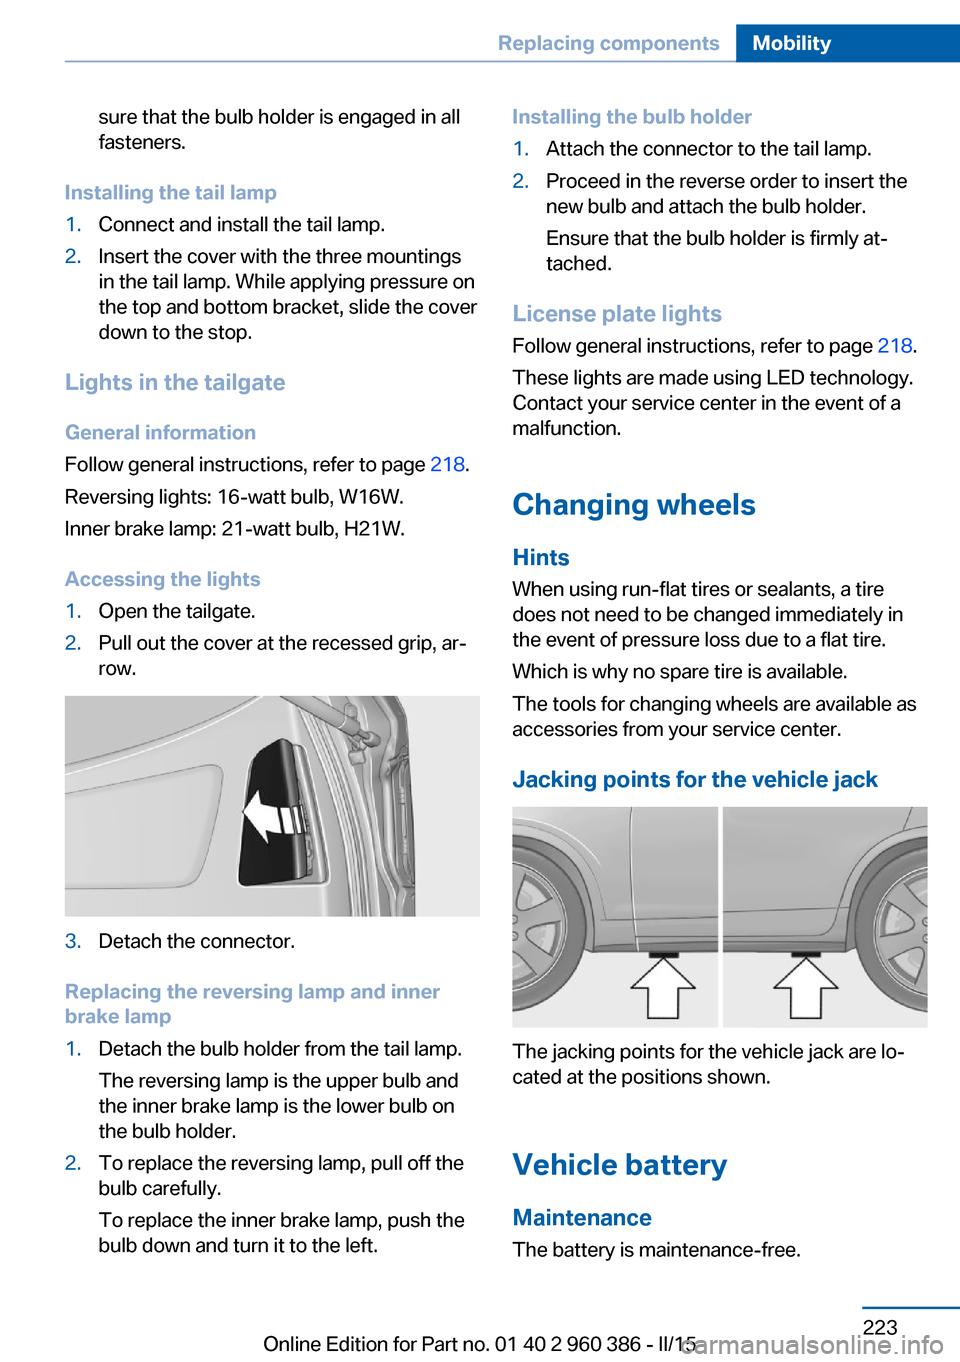 BMW X3 2015 F25 User Guide sure that the bulb holder is engaged in all
fasteners.
Installing the tail lamp
1.Connect and install the tail lamp.2.Insert the cover with the three mountings
in the tail lamp. While applying pressur